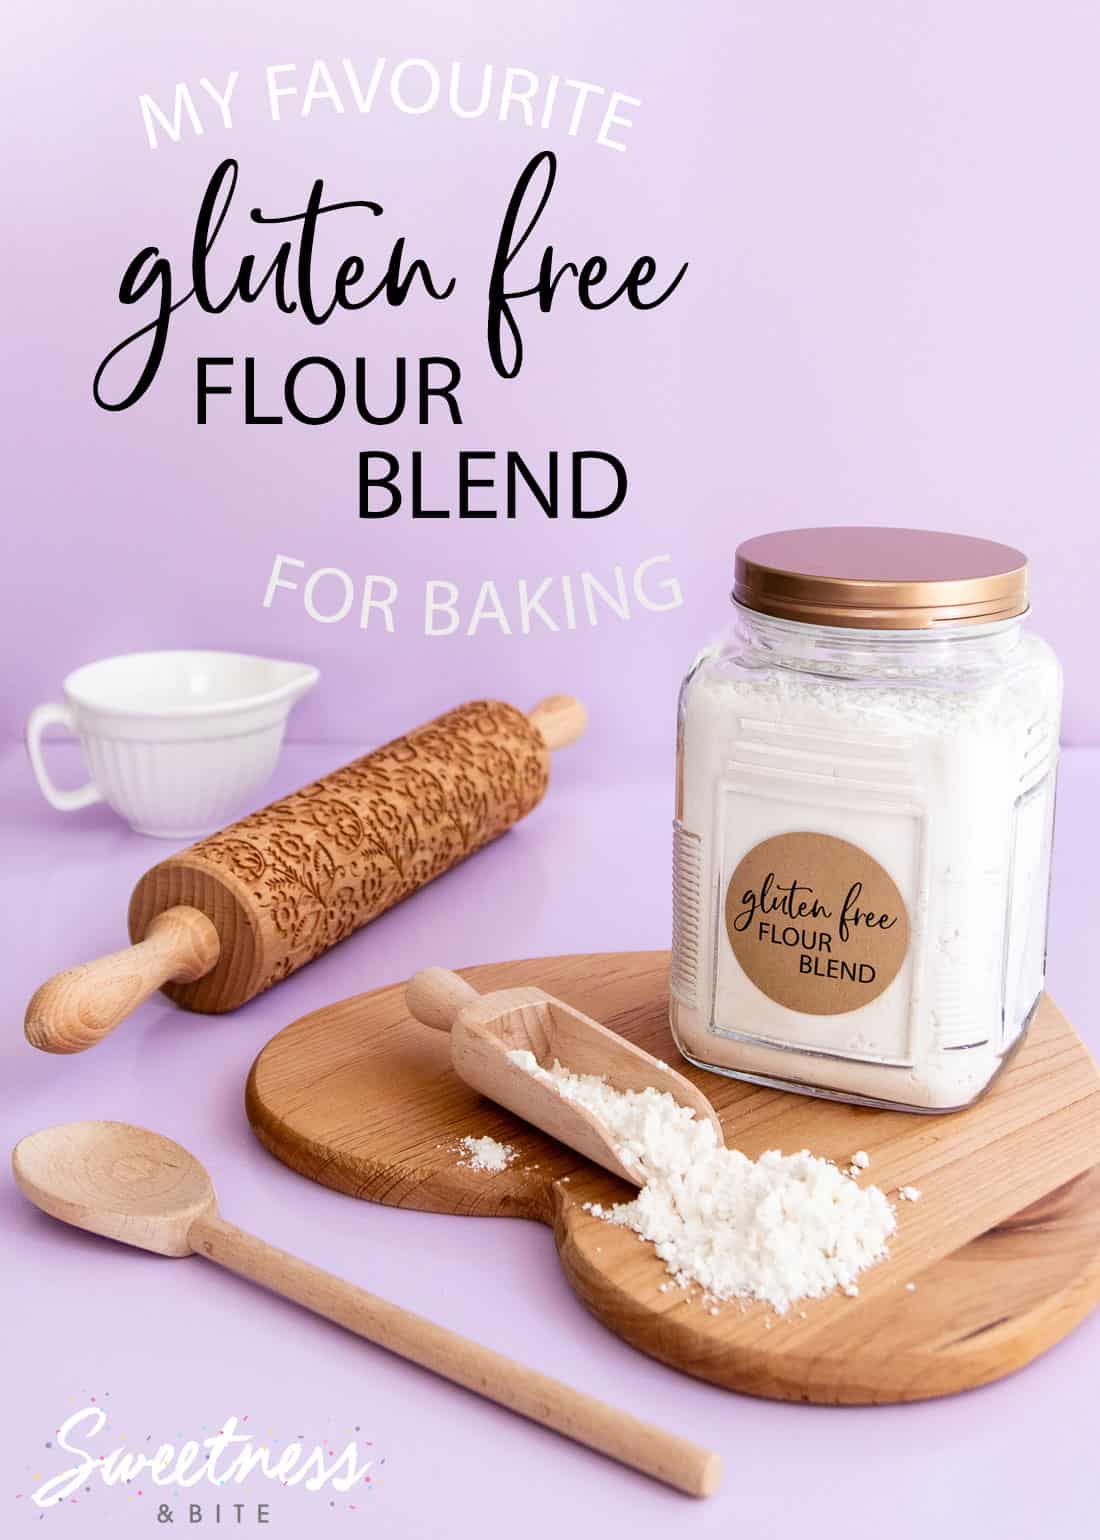 A jar of gluten free flour sitting on a wooden board, on a purple background, with text overlay reading 